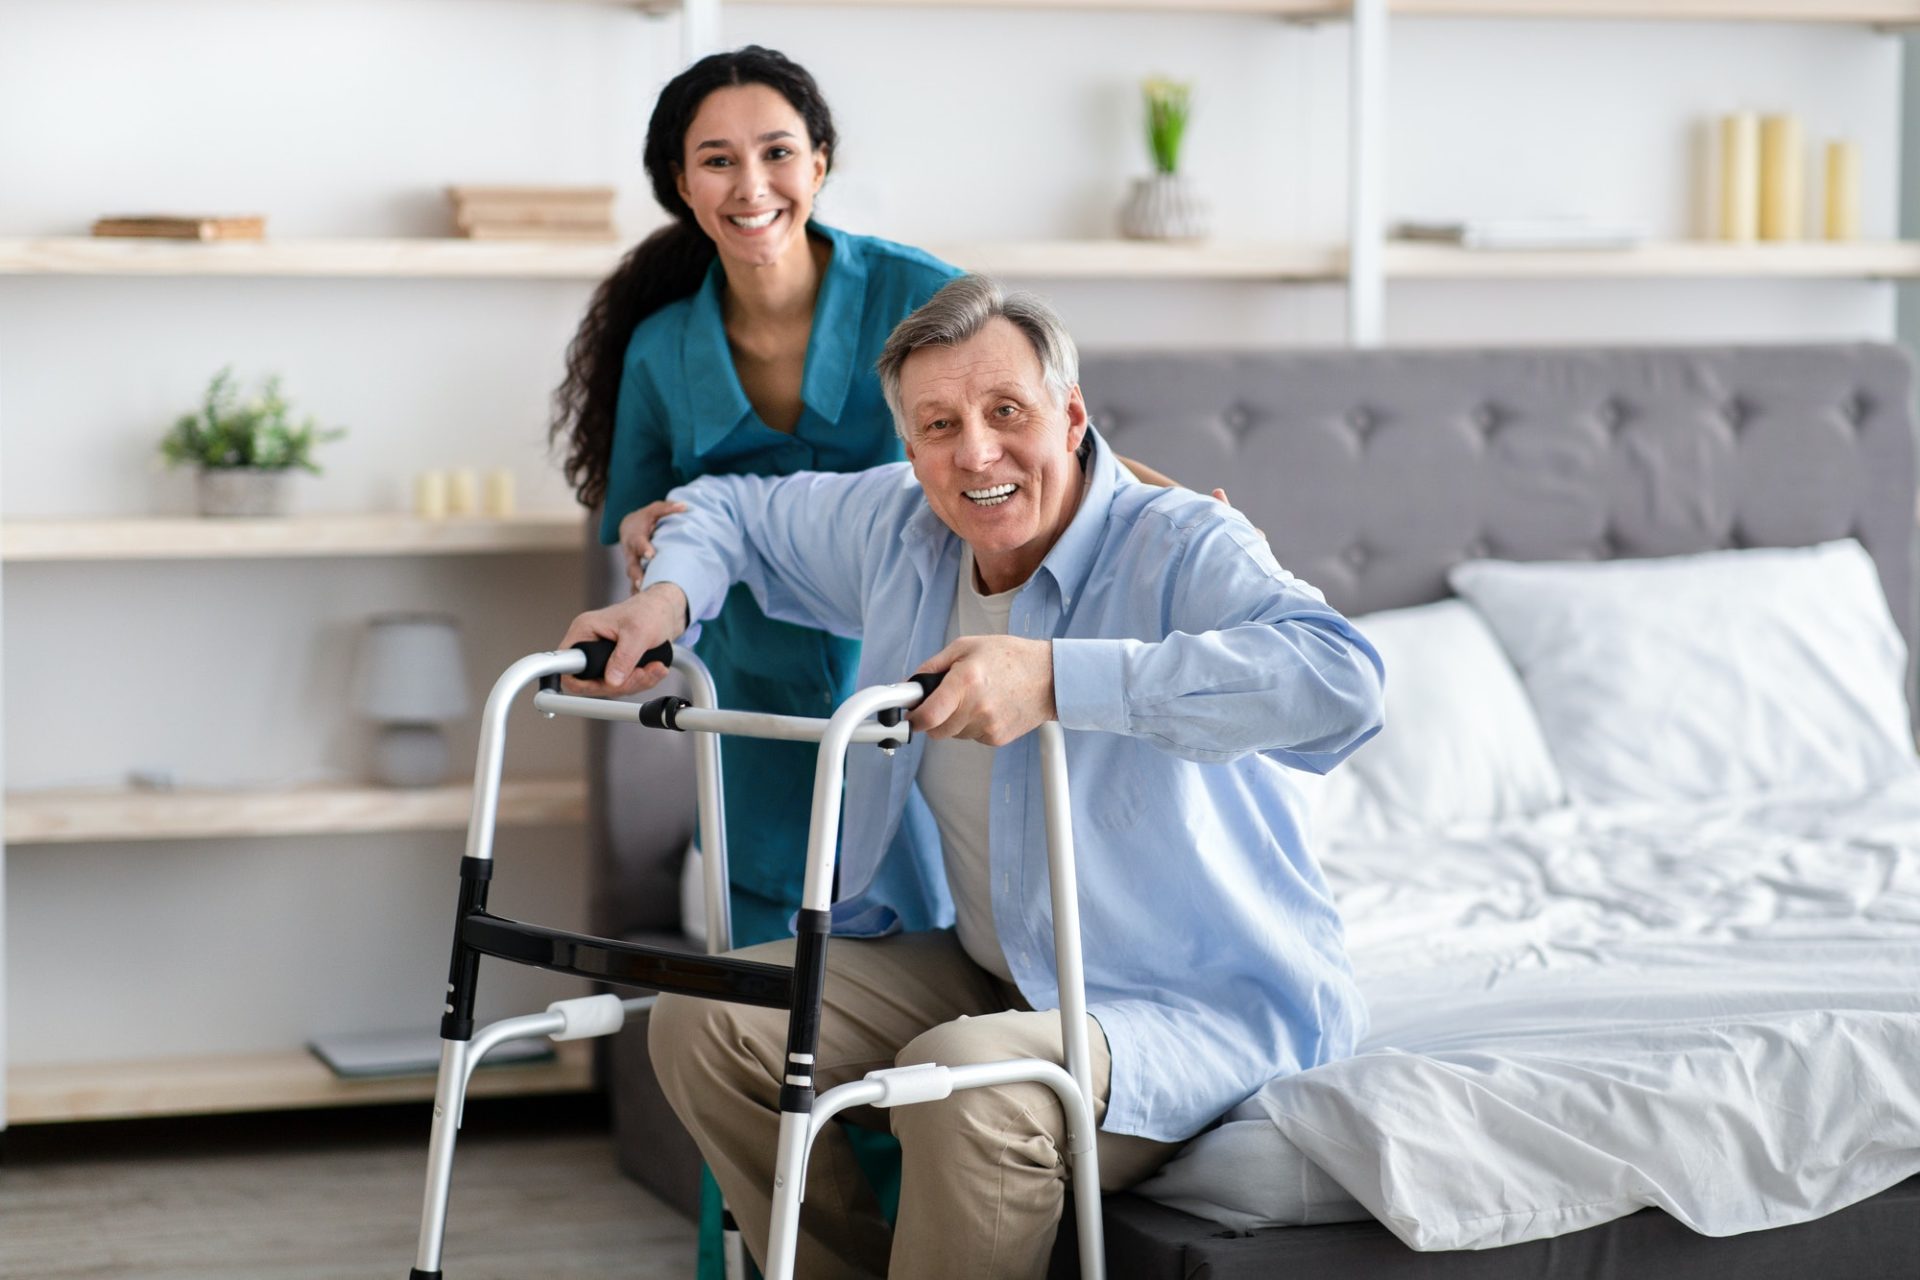 Female nurse helping elderly male with walking frame stand up from bed at home. Professional care